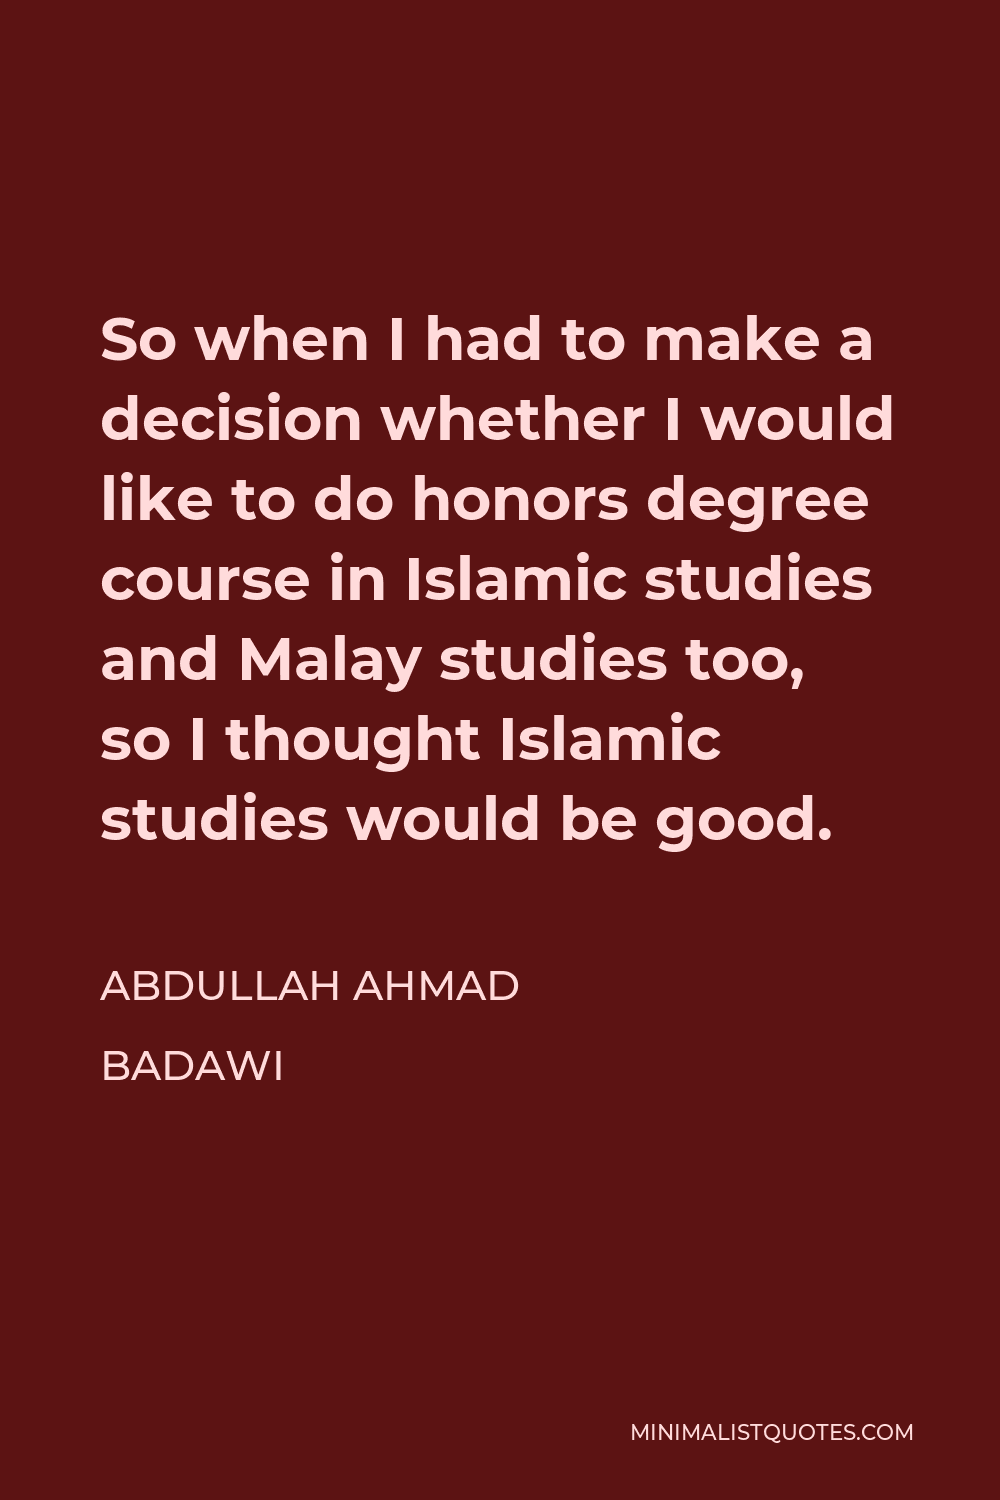 Abdullah Ahmad Badawi Quote - So when I had to make a decision whether I would like to do honors degree course in Islamic studies and Malay studies too, so I thought Islamic studies would be good.